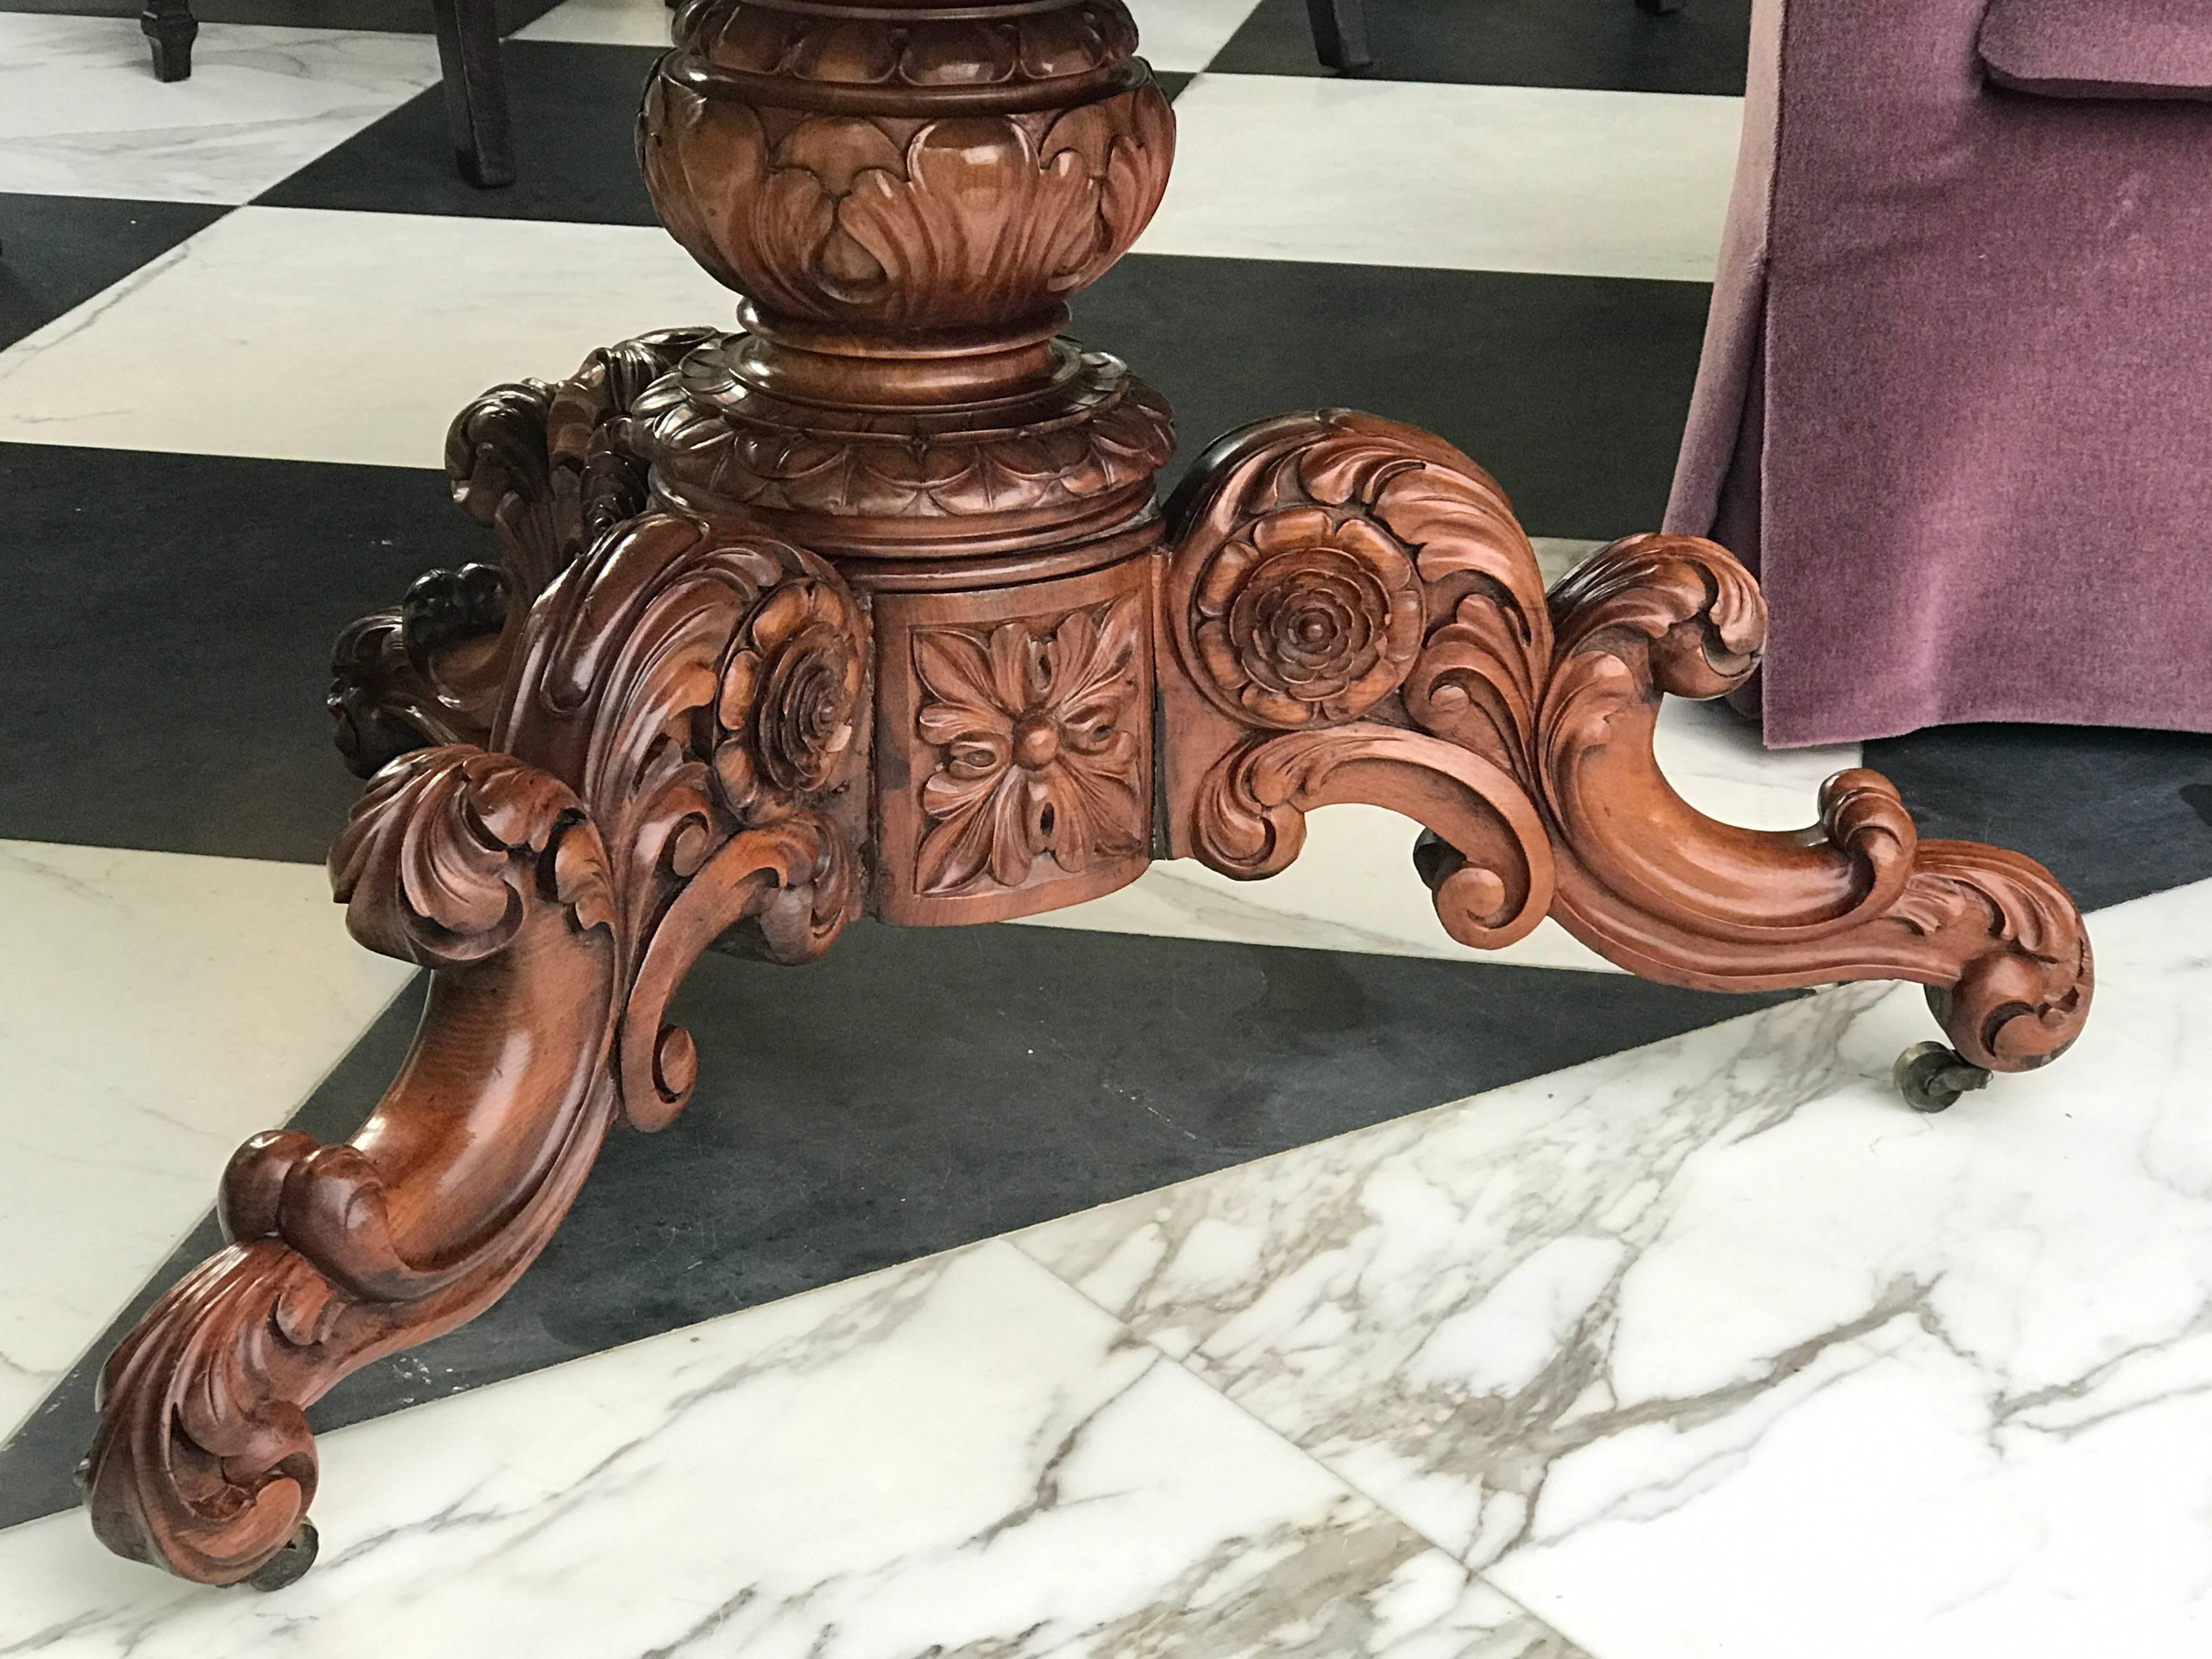 This elaborate mahogany center table was manufactured in England in the Regency period. The base is heavily carved in a foliate design incorporating three dimensional roses and rests on its original brass castors. The rich rouge marble top is a